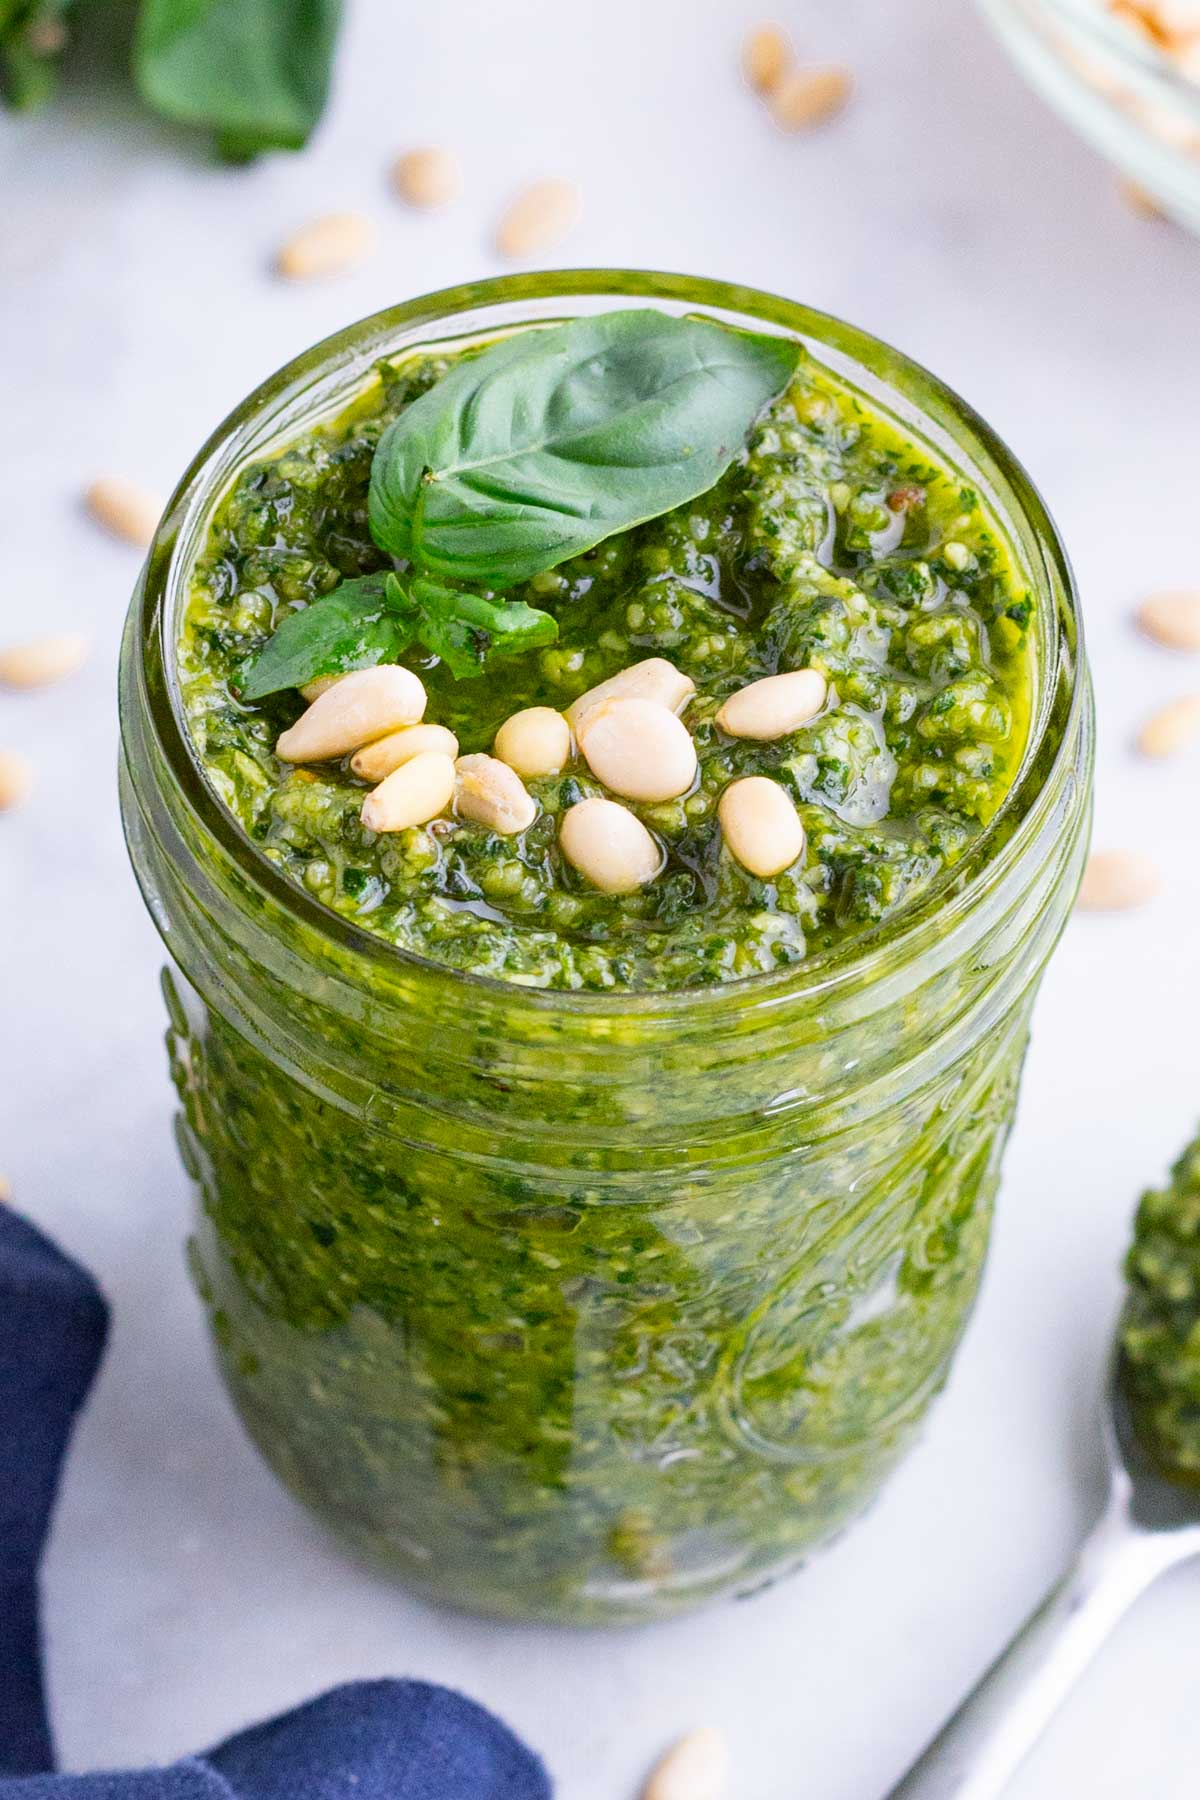 Basil leaves top a fresh basil pesto sauce to be used with bruschetta, pasta, or chicken recipes.